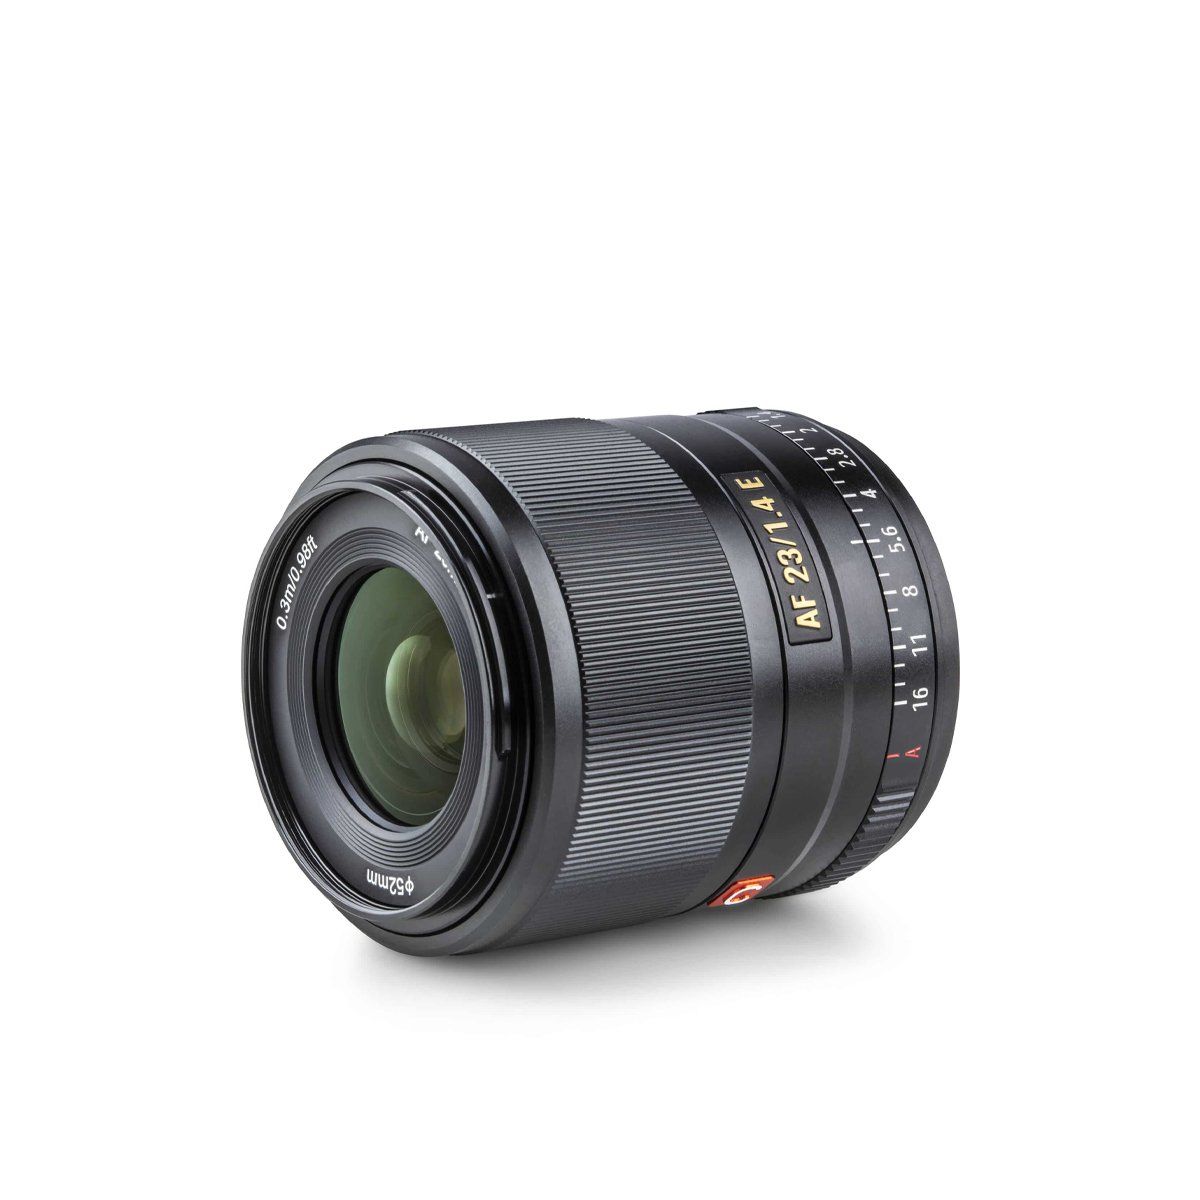  Ống kính Viltrox AF 23mm f/1.4 E For Sony E 